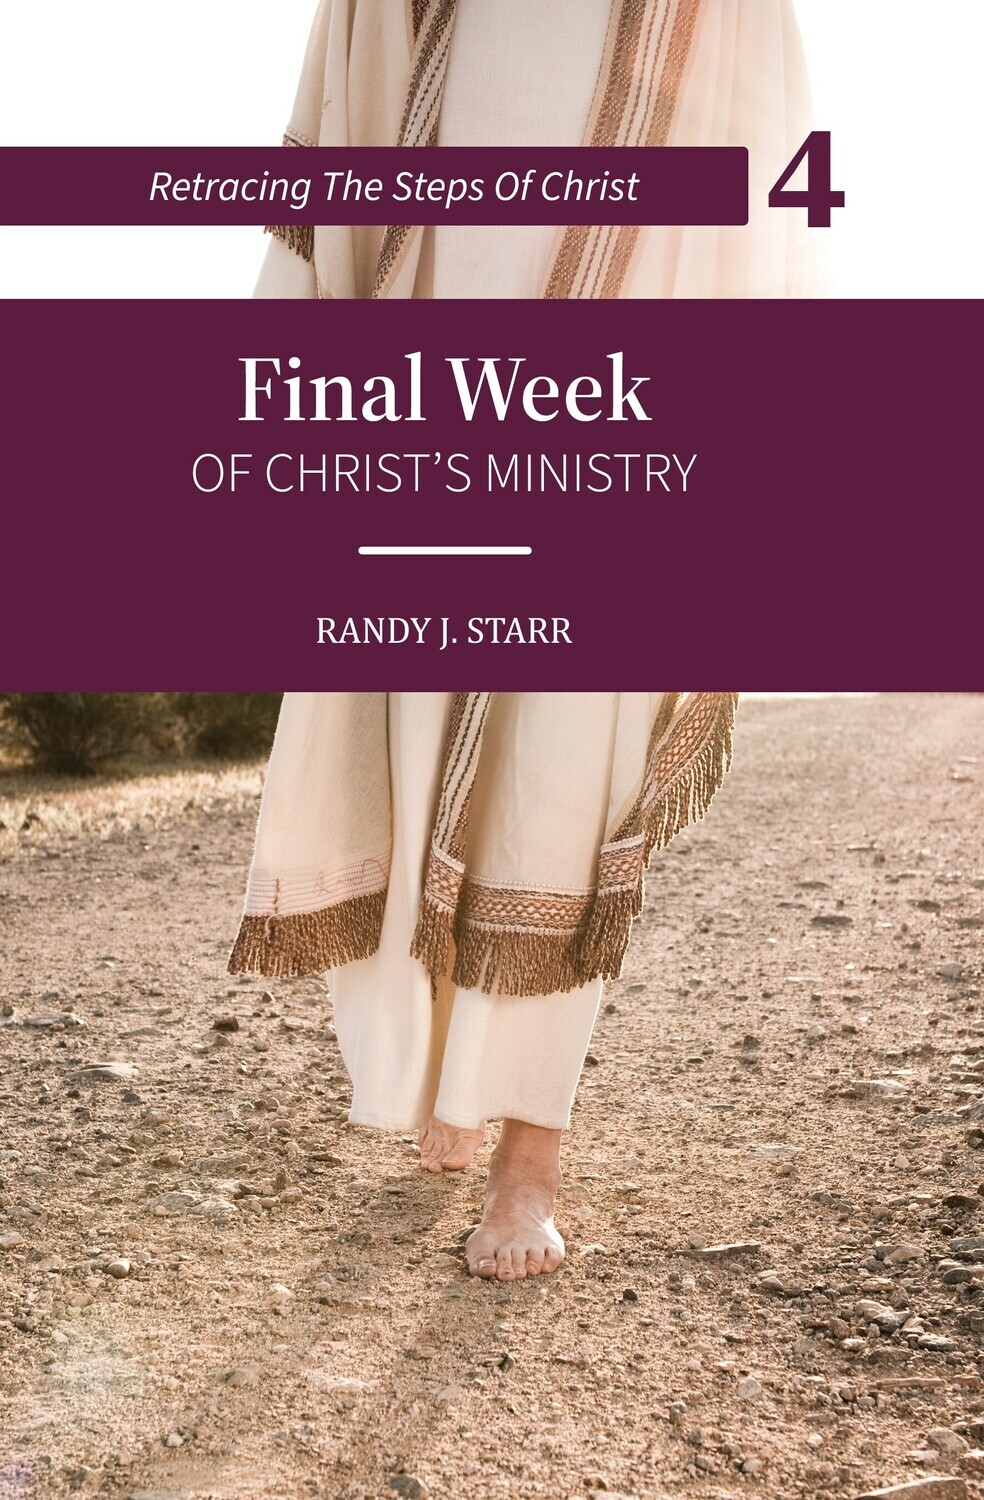 Retracing the Steps of Christ -BOOK 4 of 4 books -Final Week of Christ’s Ministry - His Passion